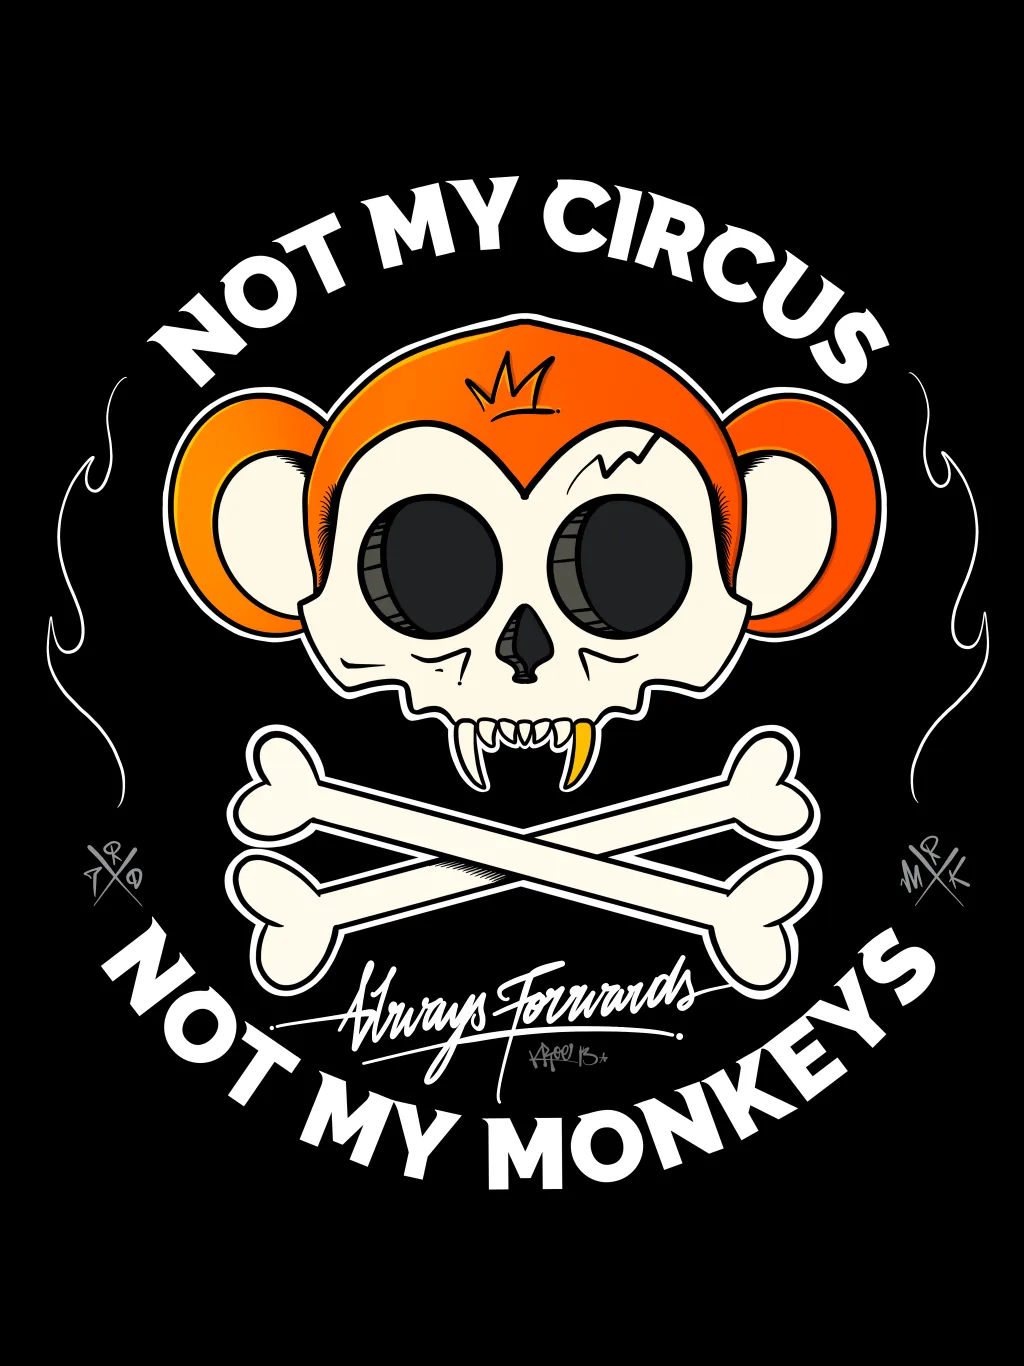 Not My Circus, Not My Monkeys - Illustrated in Procreate